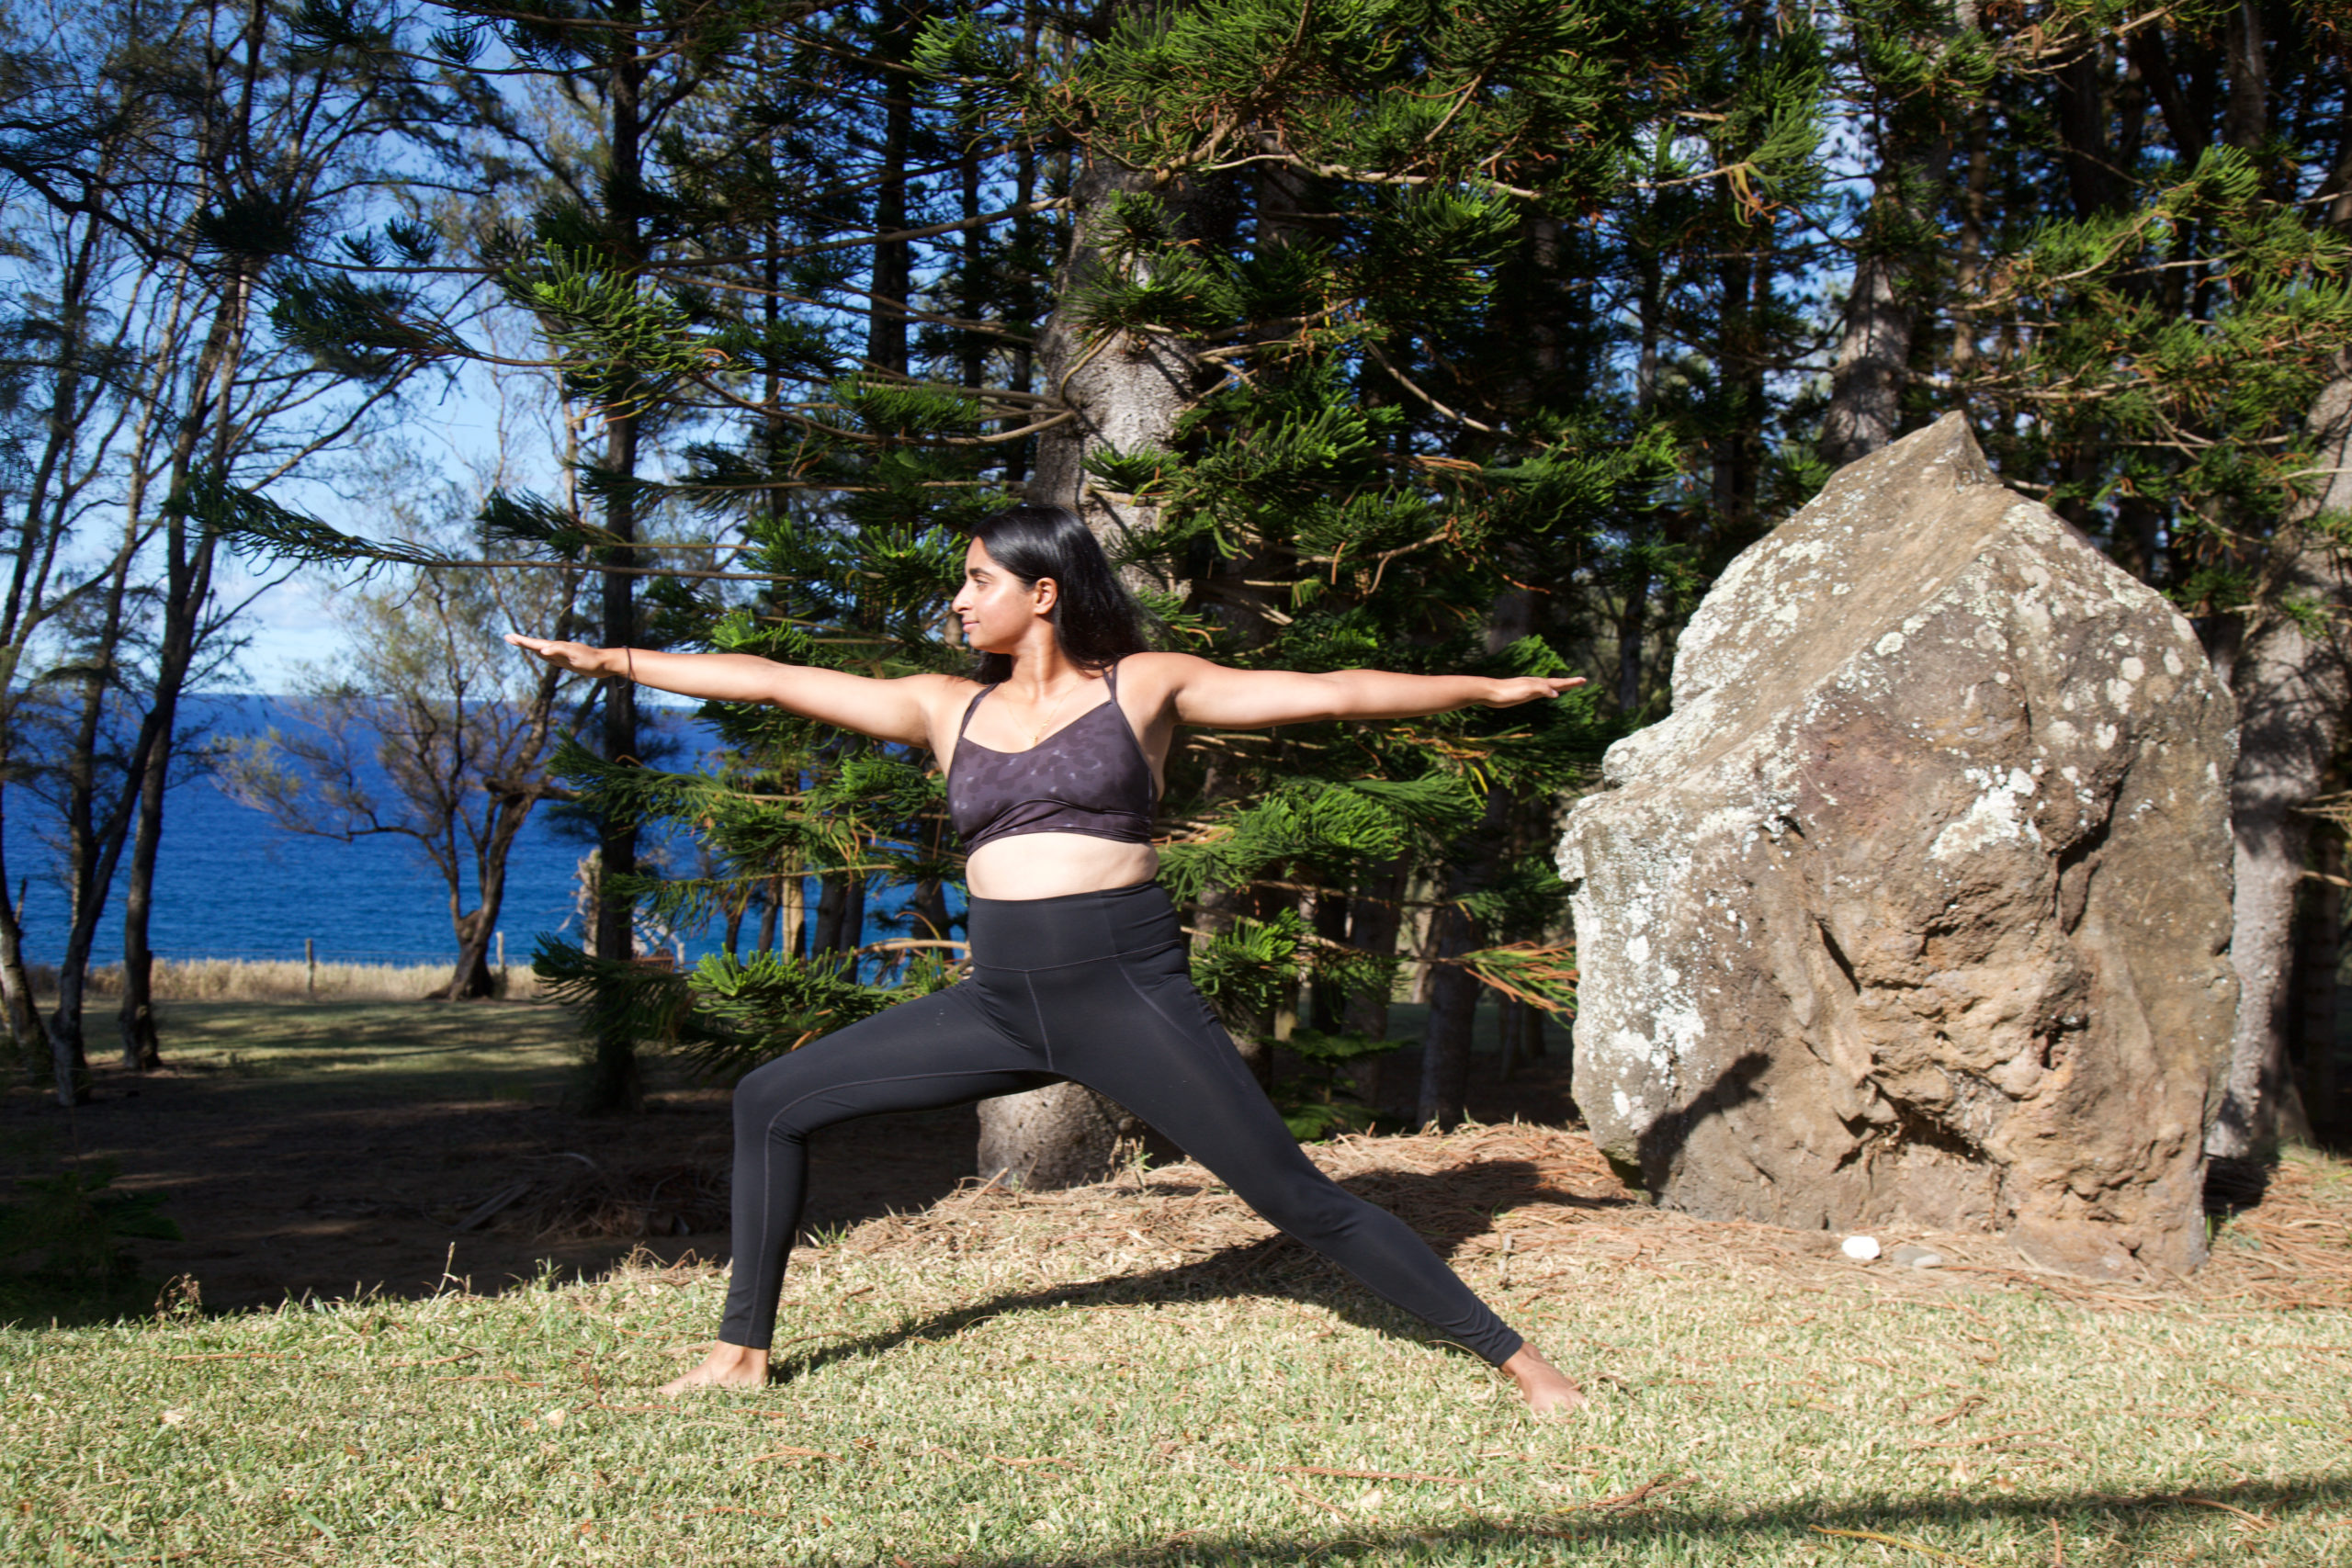 Yoga girl in all black outfit does warrior two pose by a boulder and forest